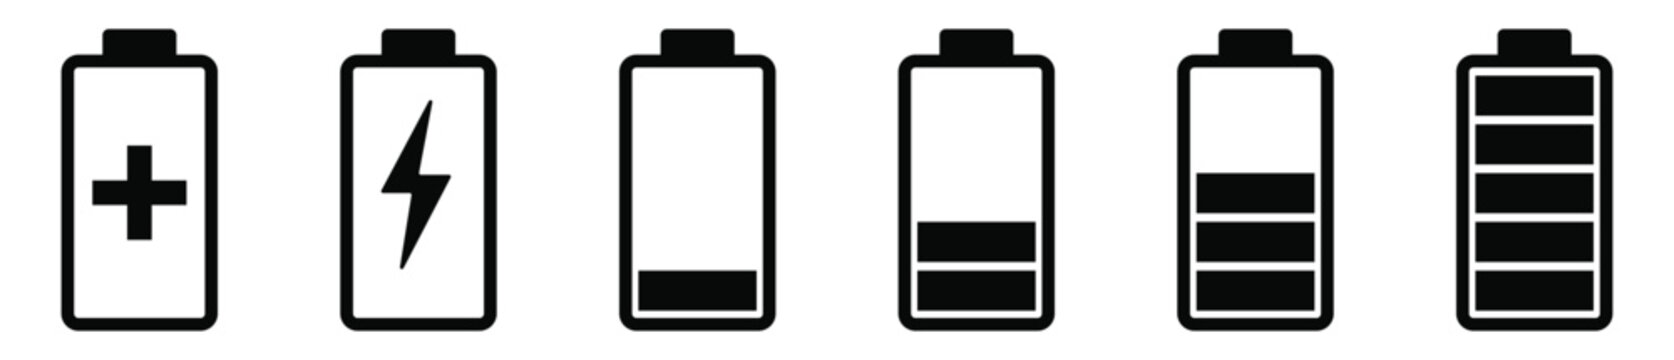 Battery GSM icon set. Isolated black smartphone battery level indicator icons on white background. Concept power, energy, low , full, emplty, load. UI elements symbols. Vector design.